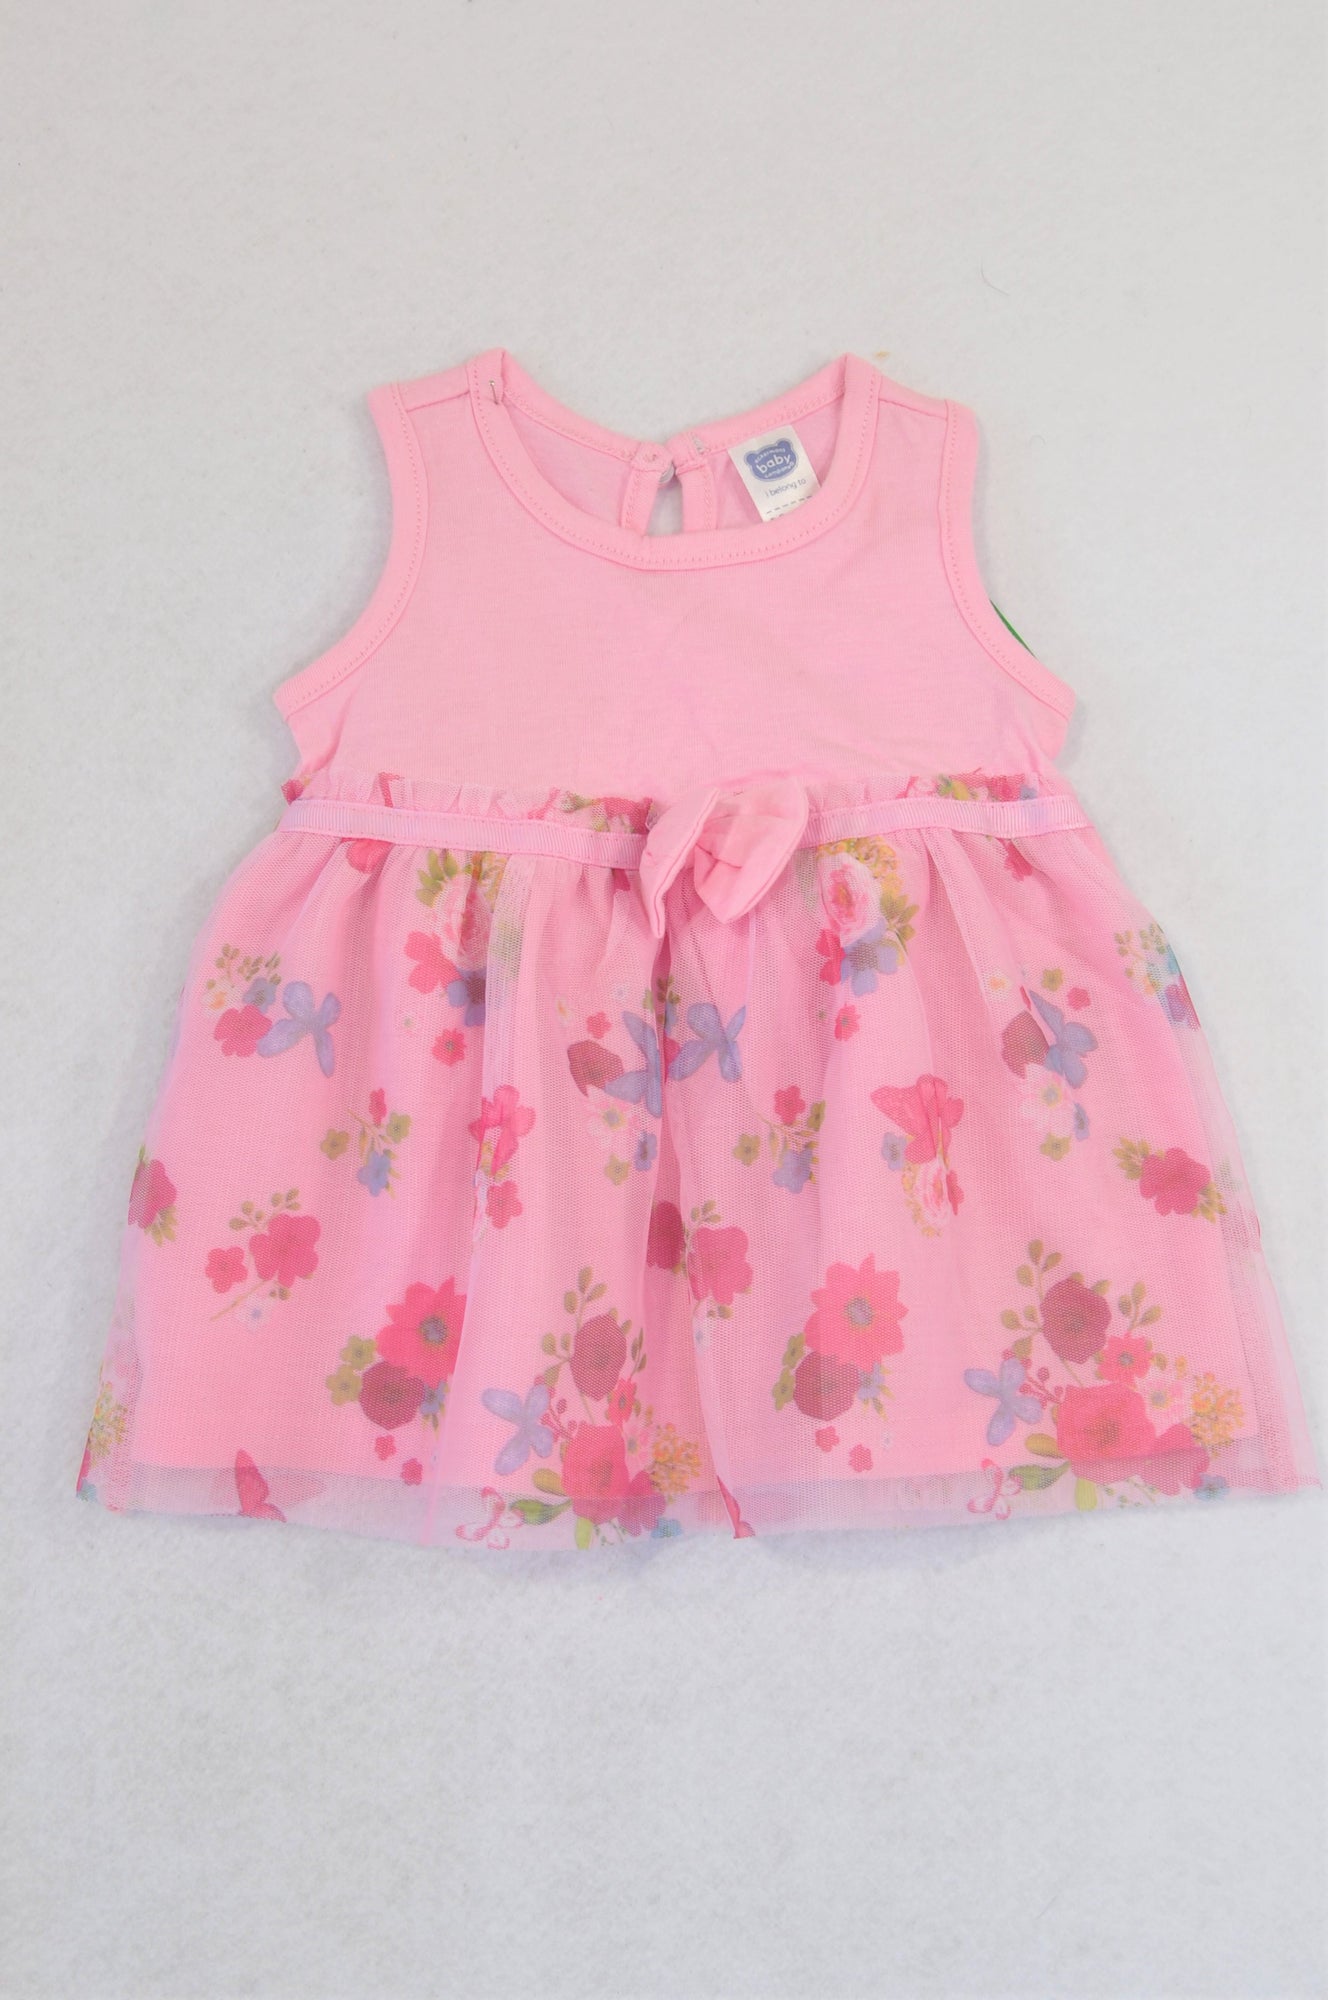 ackermans baby girl clothes